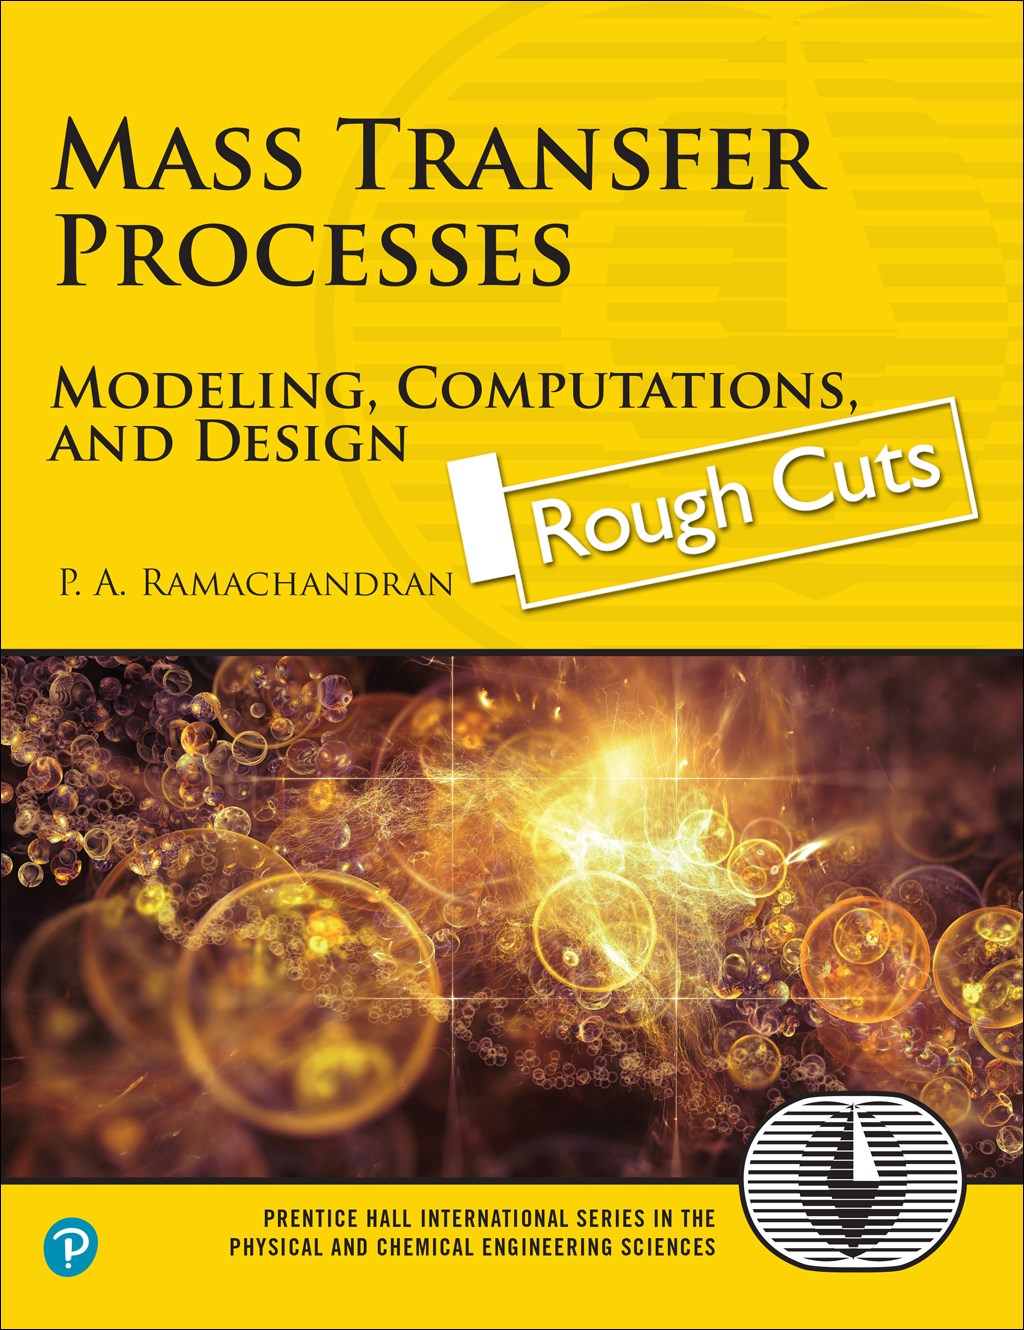 Mass Transfer Processes: Modeling, Computations, and Design, Rough Cuts